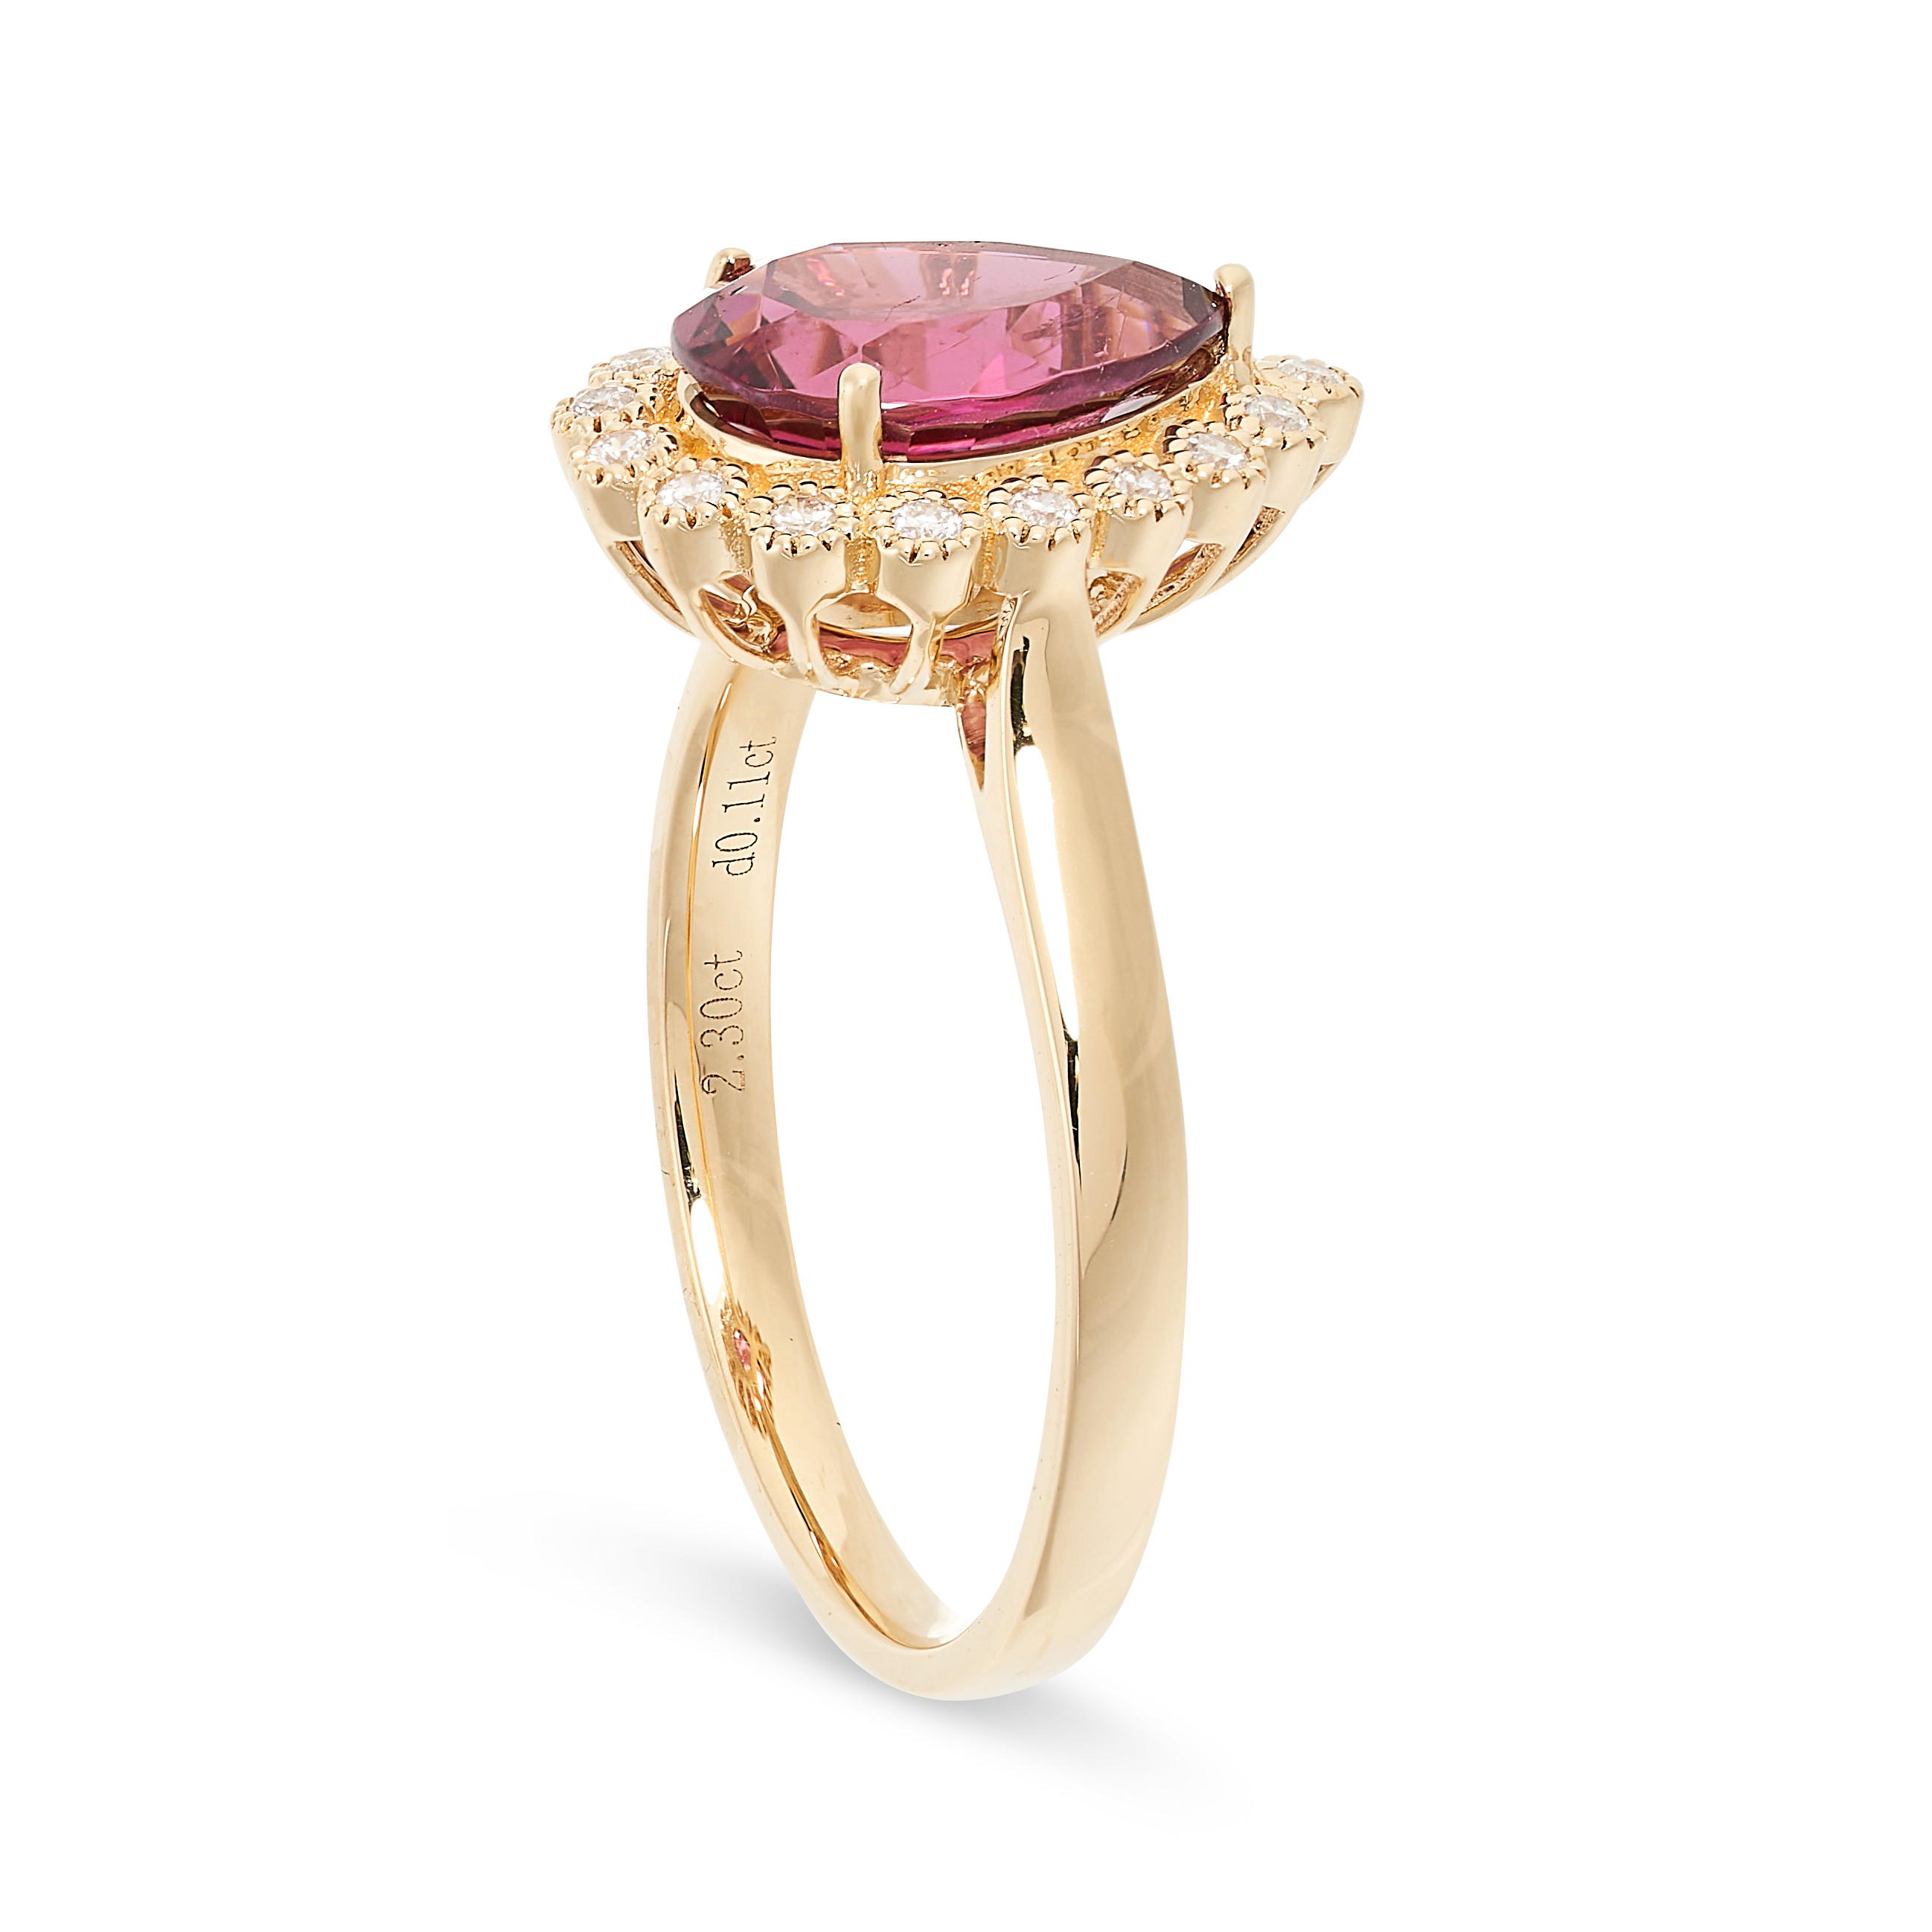 A GARNET AND DIAMOND RING in 18ct gold, set with a pear shaped garnet of 2.30 carats in a cluster of - Image 2 of 2